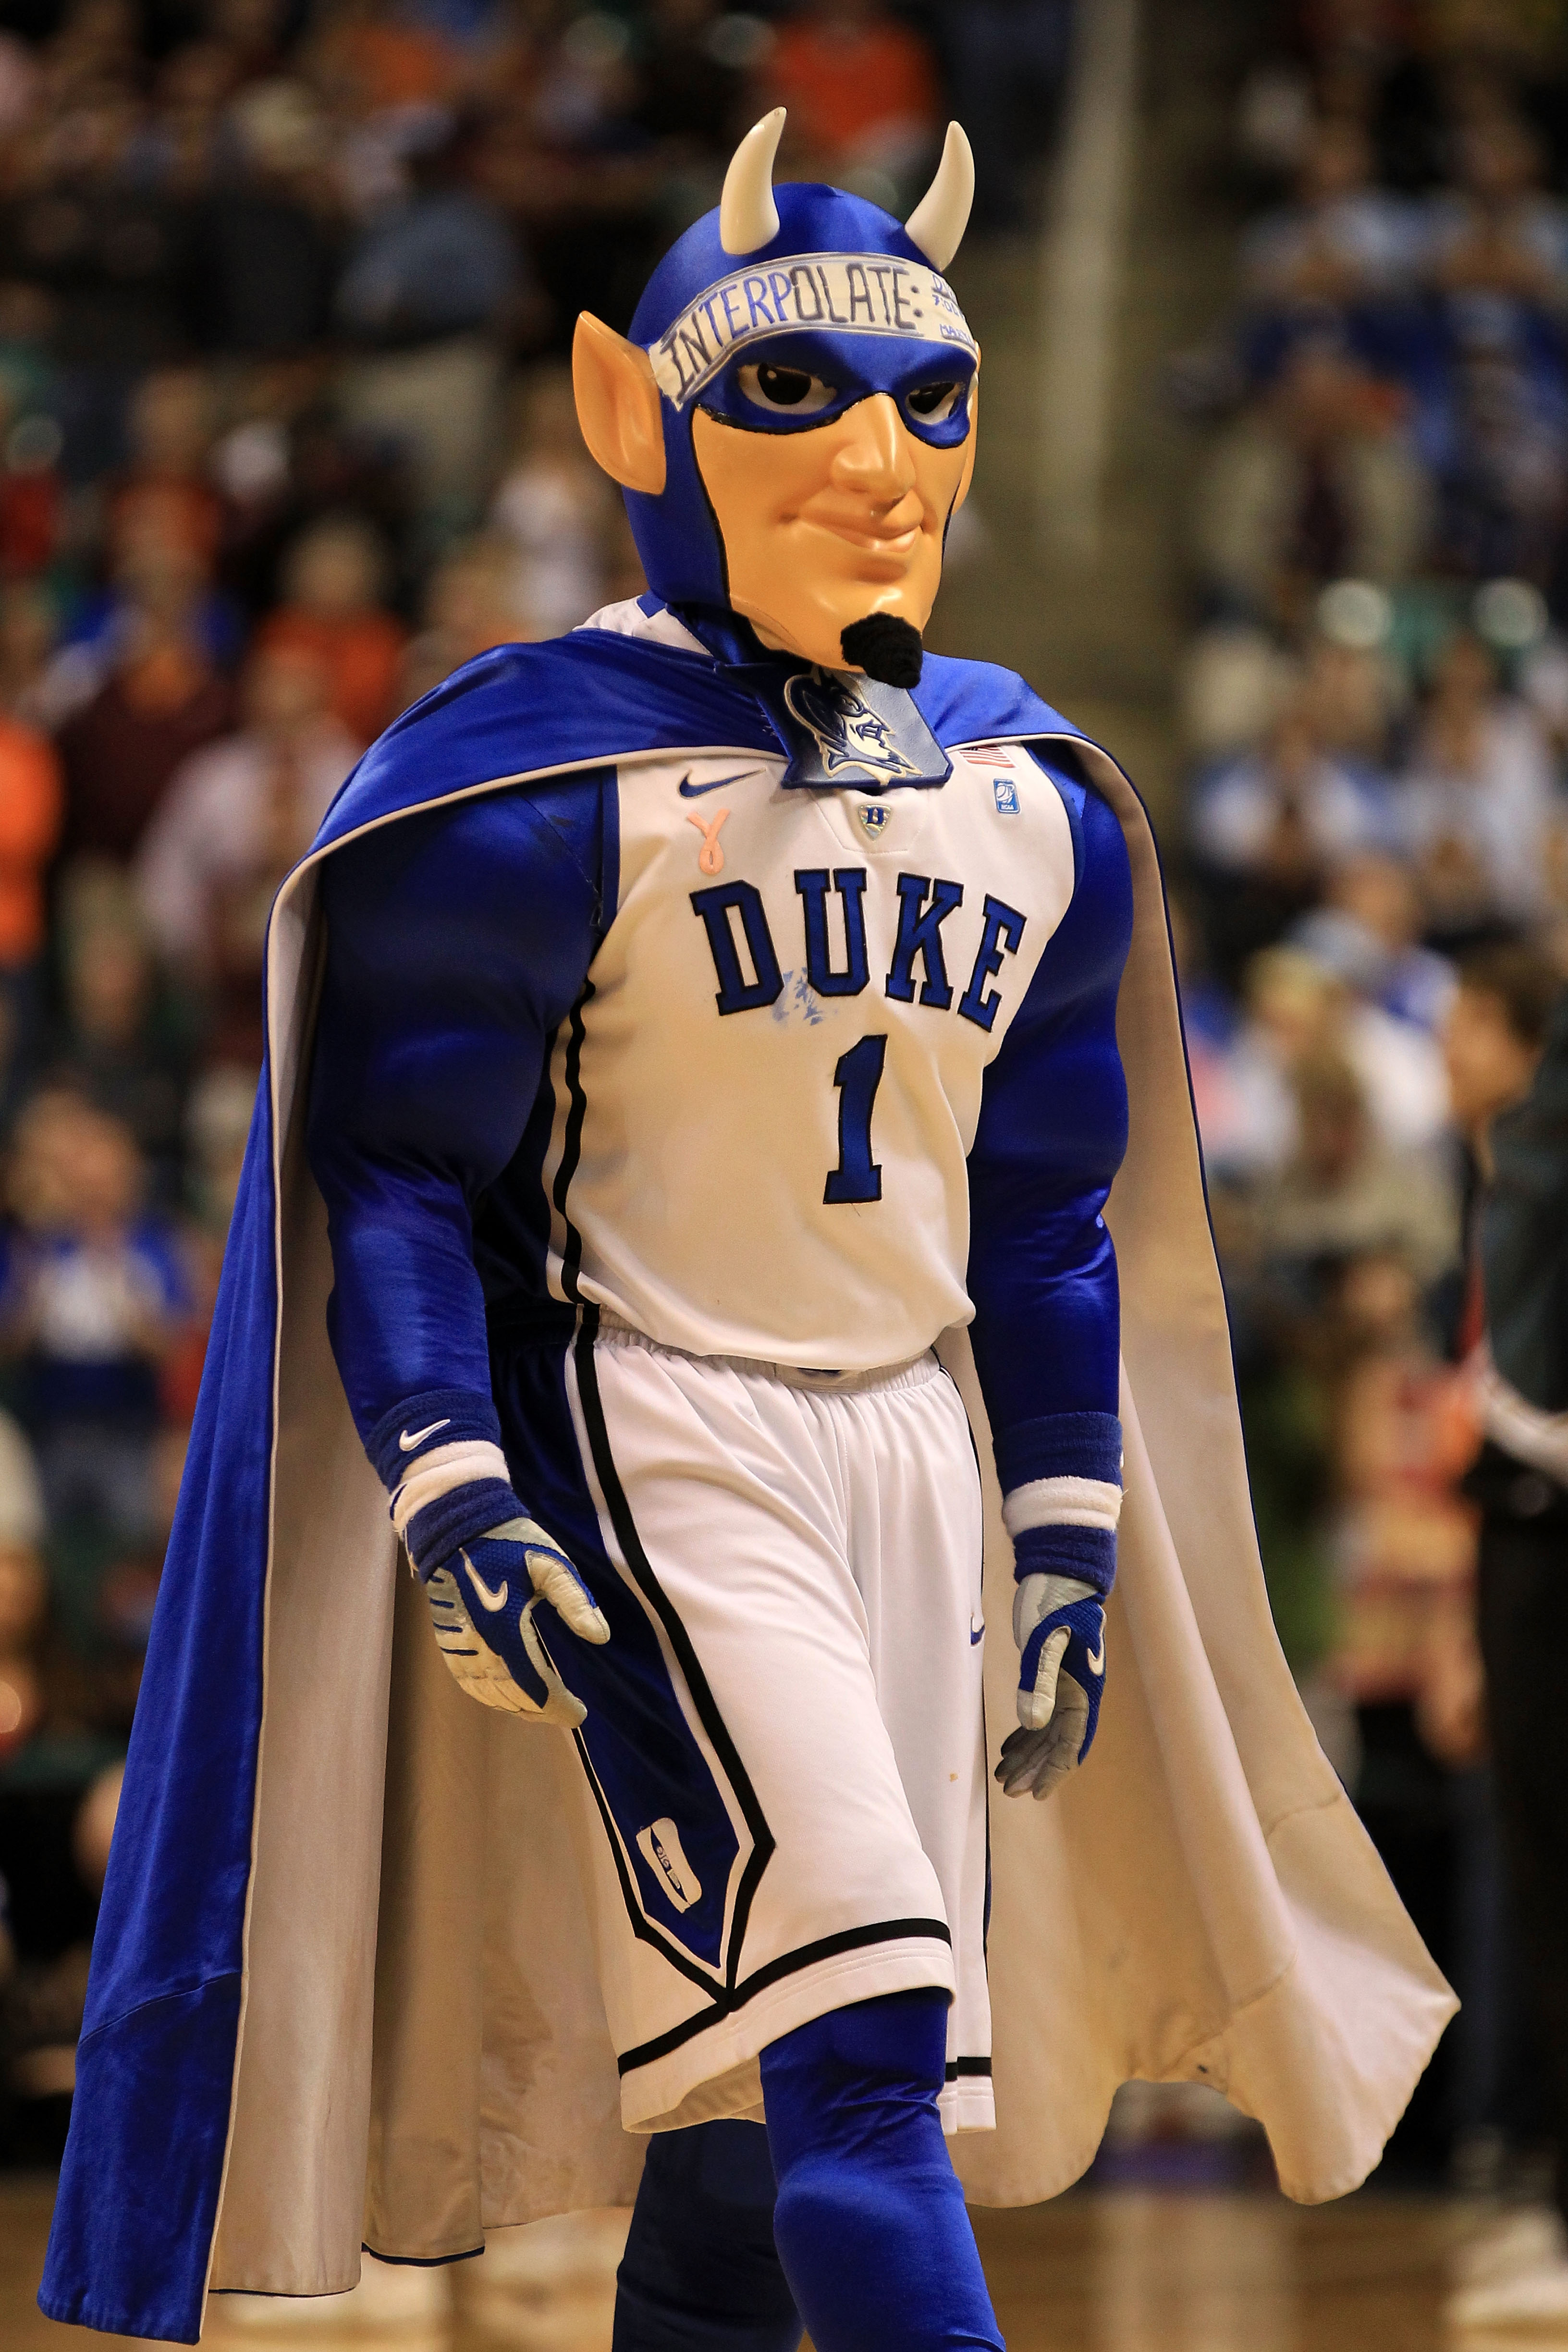 ACC Background Checks: The Origin of Every Team's Nickname and Mascot ...